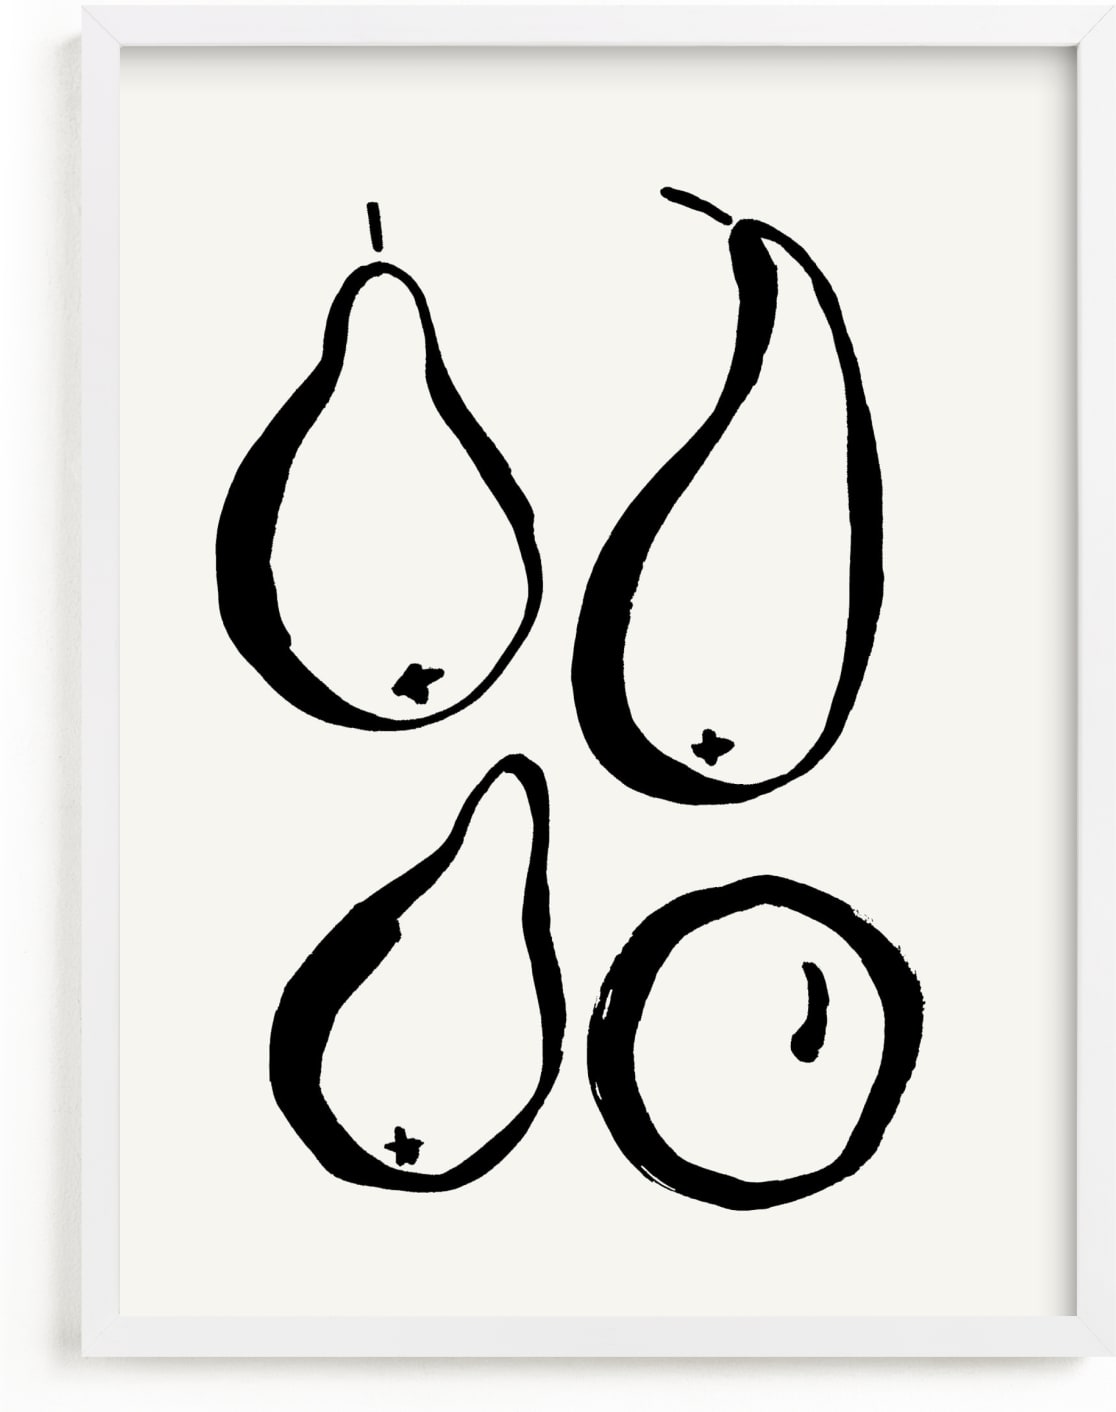 This is a black and white art by Sonya Percival called Still-life with four pears.